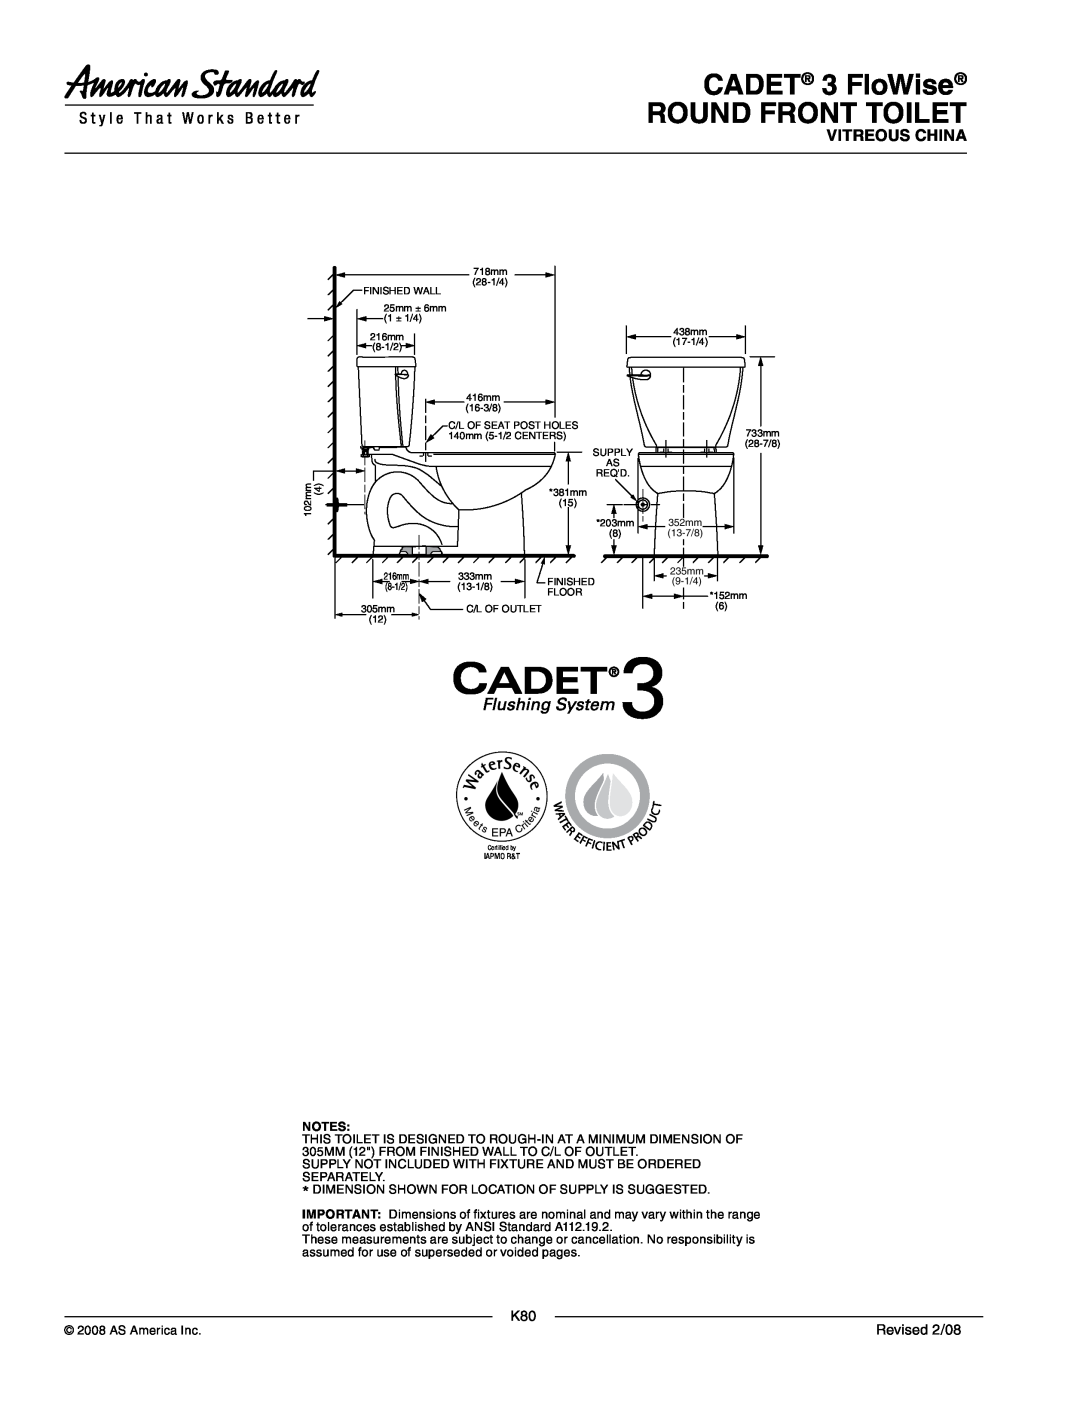 American Standard 3011.128, 4021.128, 2829.128 dimensions CADET 3 FloWise ROUND FRONT TOILET, Vitreous China, Revised 2/08 